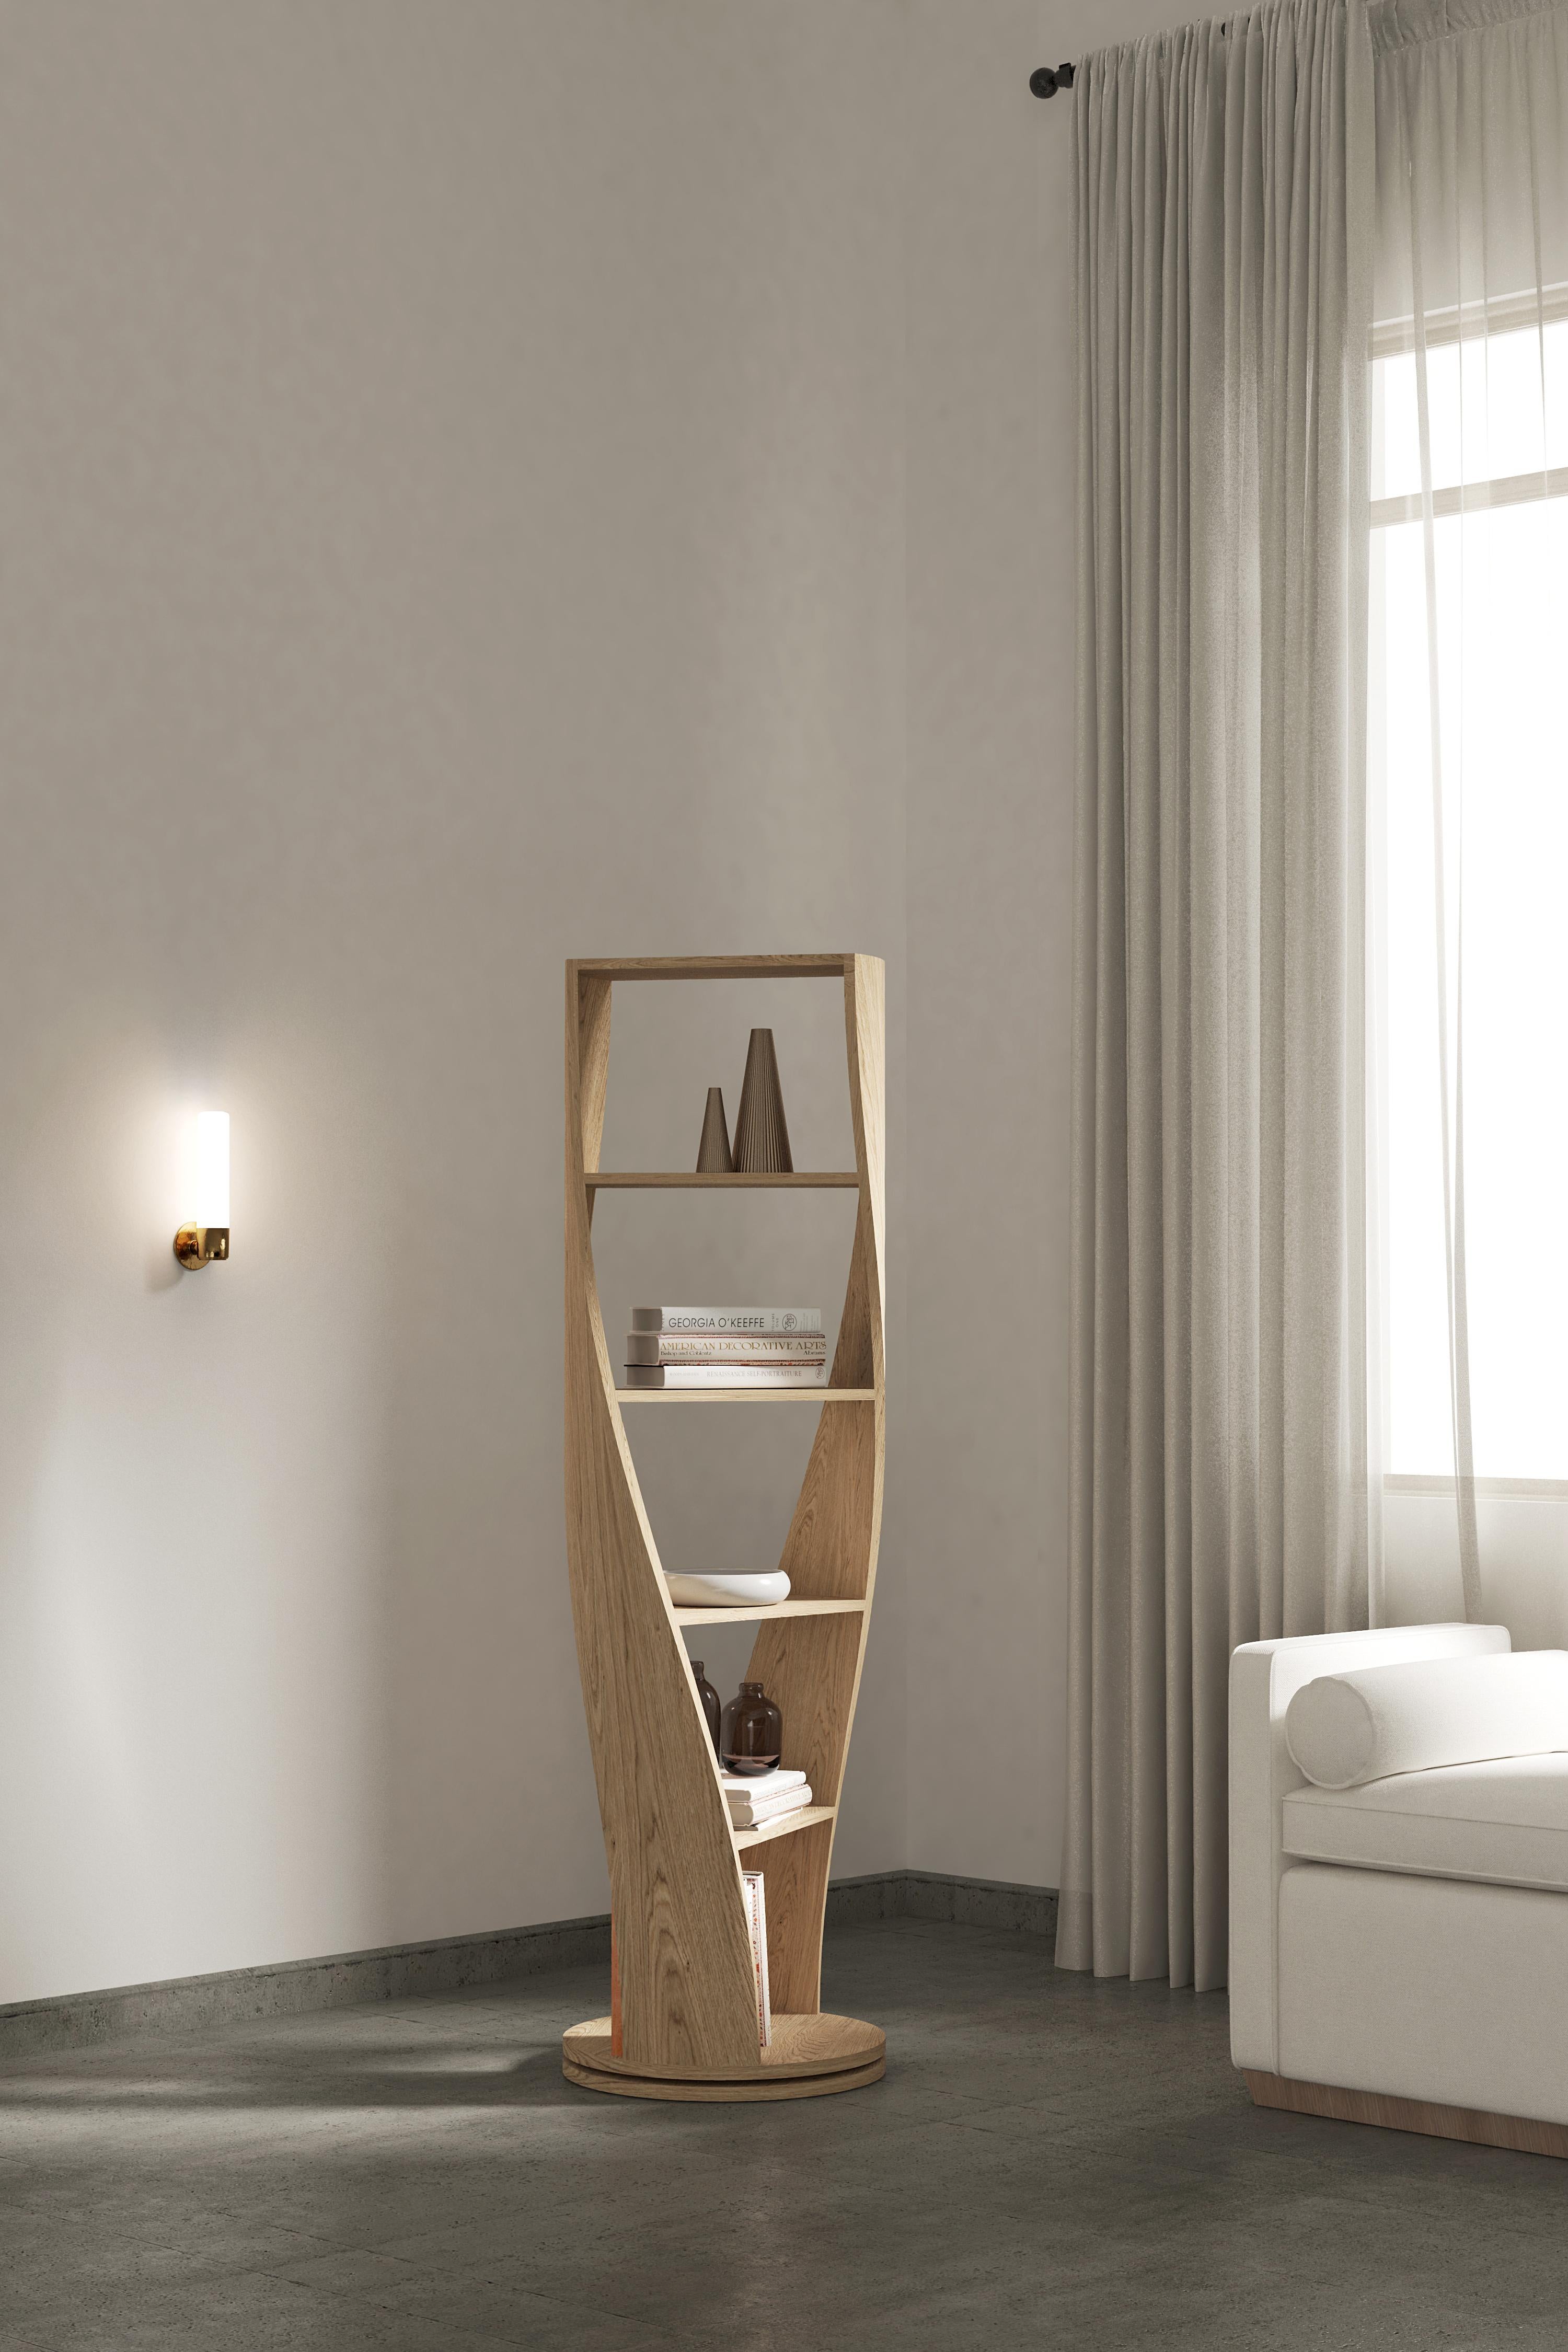 MYDNA is a chic and contemporary storage system inspired by the DNA concept: both by its sophisticated double helix shape, and by the metaphorical statement that everything you place on it defines a significant part of your personal identity. MYDNA